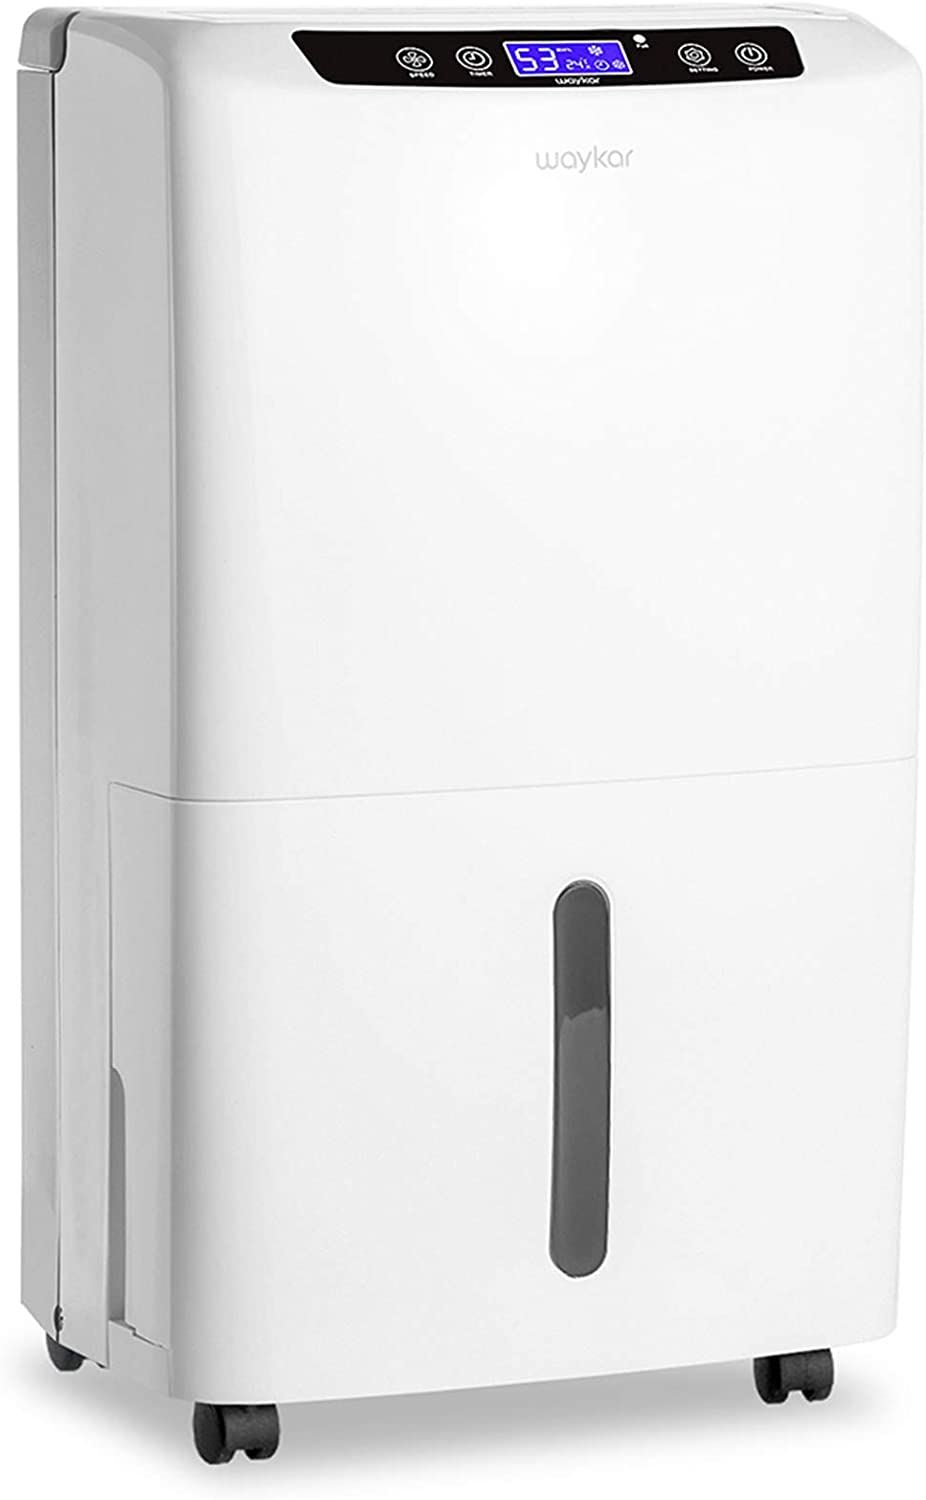 Gree Chalet 70Pint Portable Dehumidifier for Home Basements Bathrooms up to 4500 Sq.Ft Dehumidifiers for Basement Continuous Gravity Drain Casters and Washable Filter with Wheels and Quiet White 